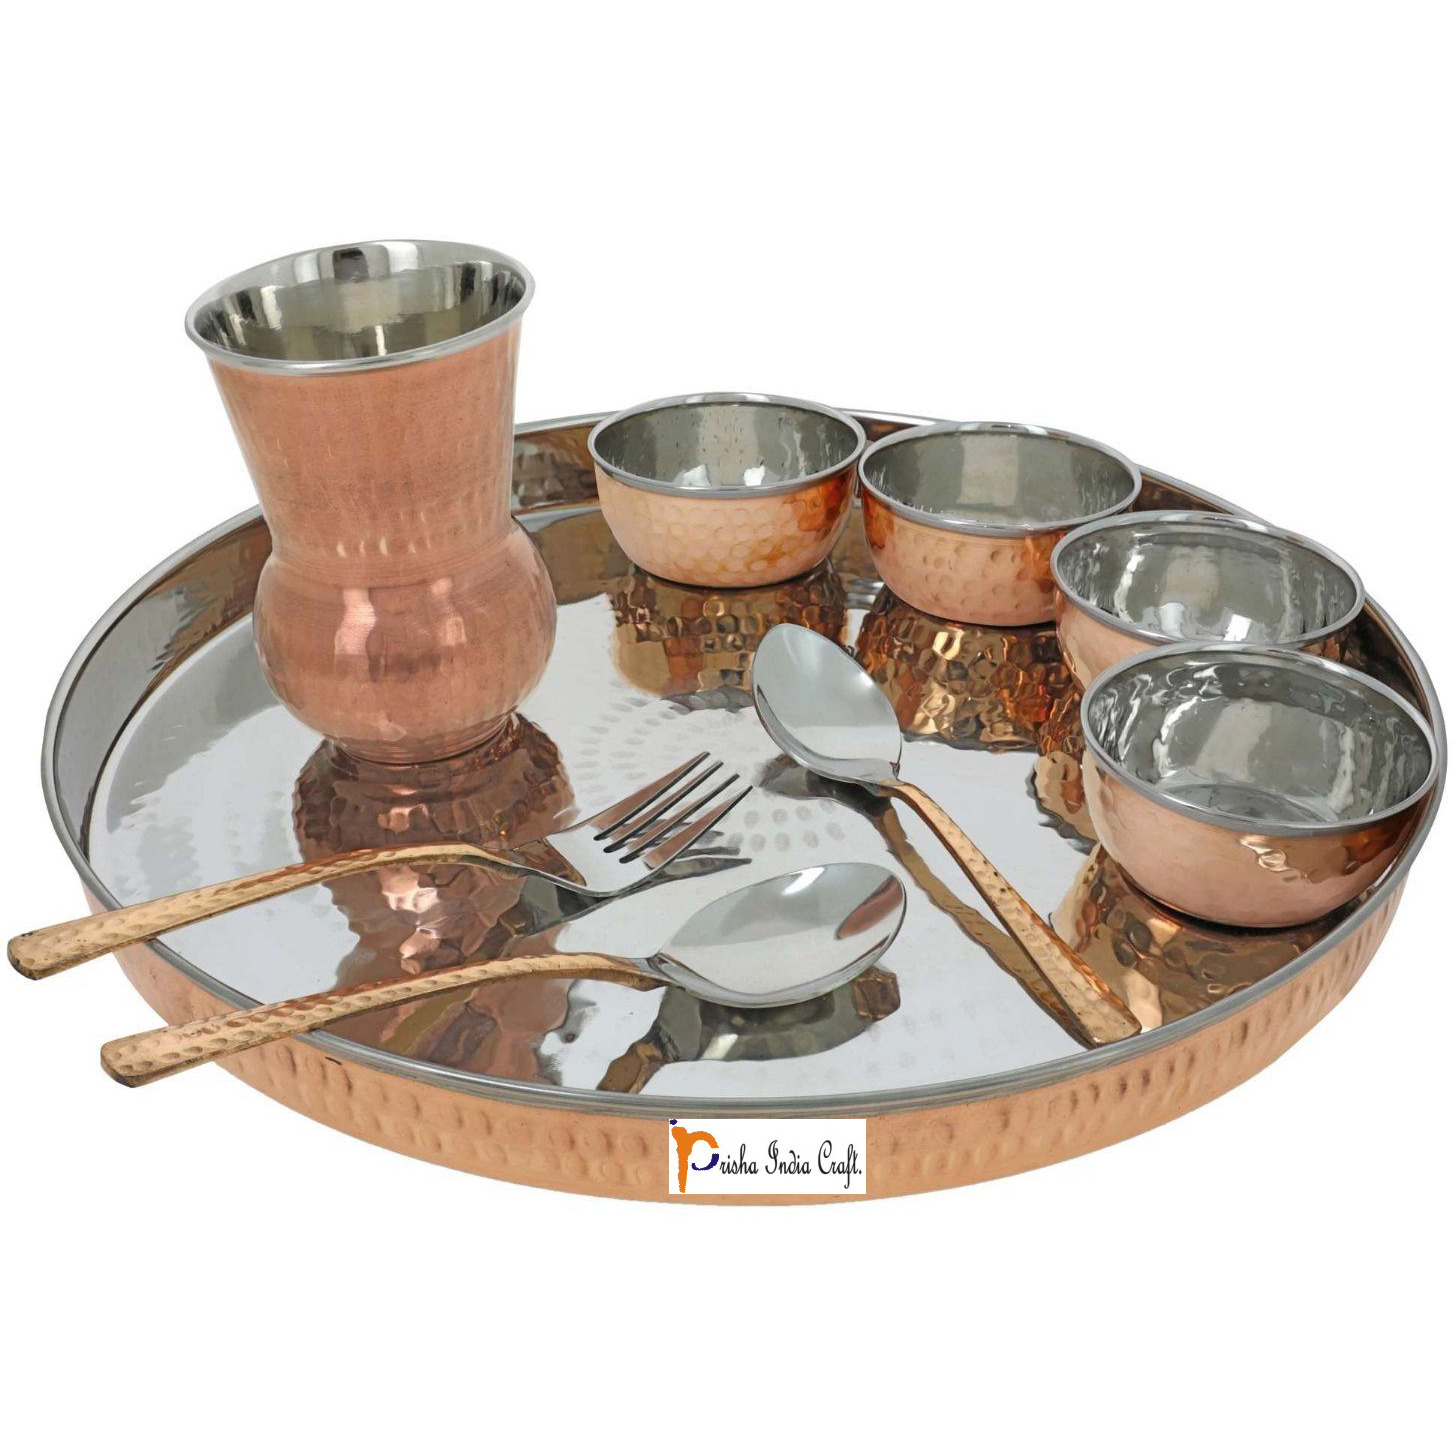 Prisha India Craft B. Set of 2 Dinnerware Traditional Stainless Steel Copper Dinner Set of Thali Plate, Bowls, Glass and Spoons, Dia 13  With 1 Pure Copper Pitcher Jug - Christmas Gift